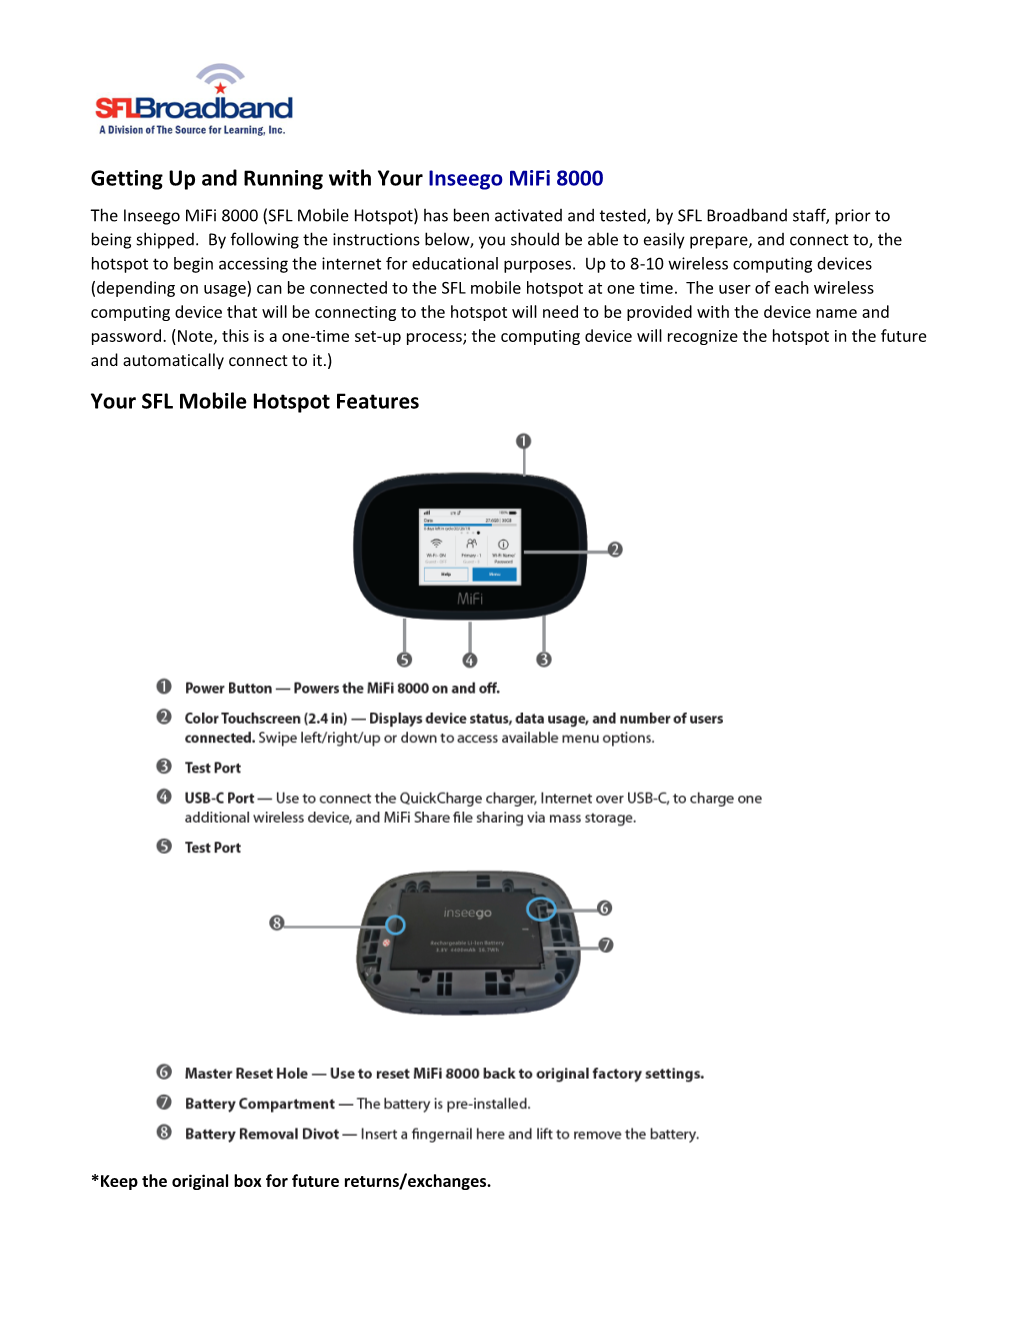 Getting up and Running with Your Inseego Mifi 8000 Your SFL Mobile